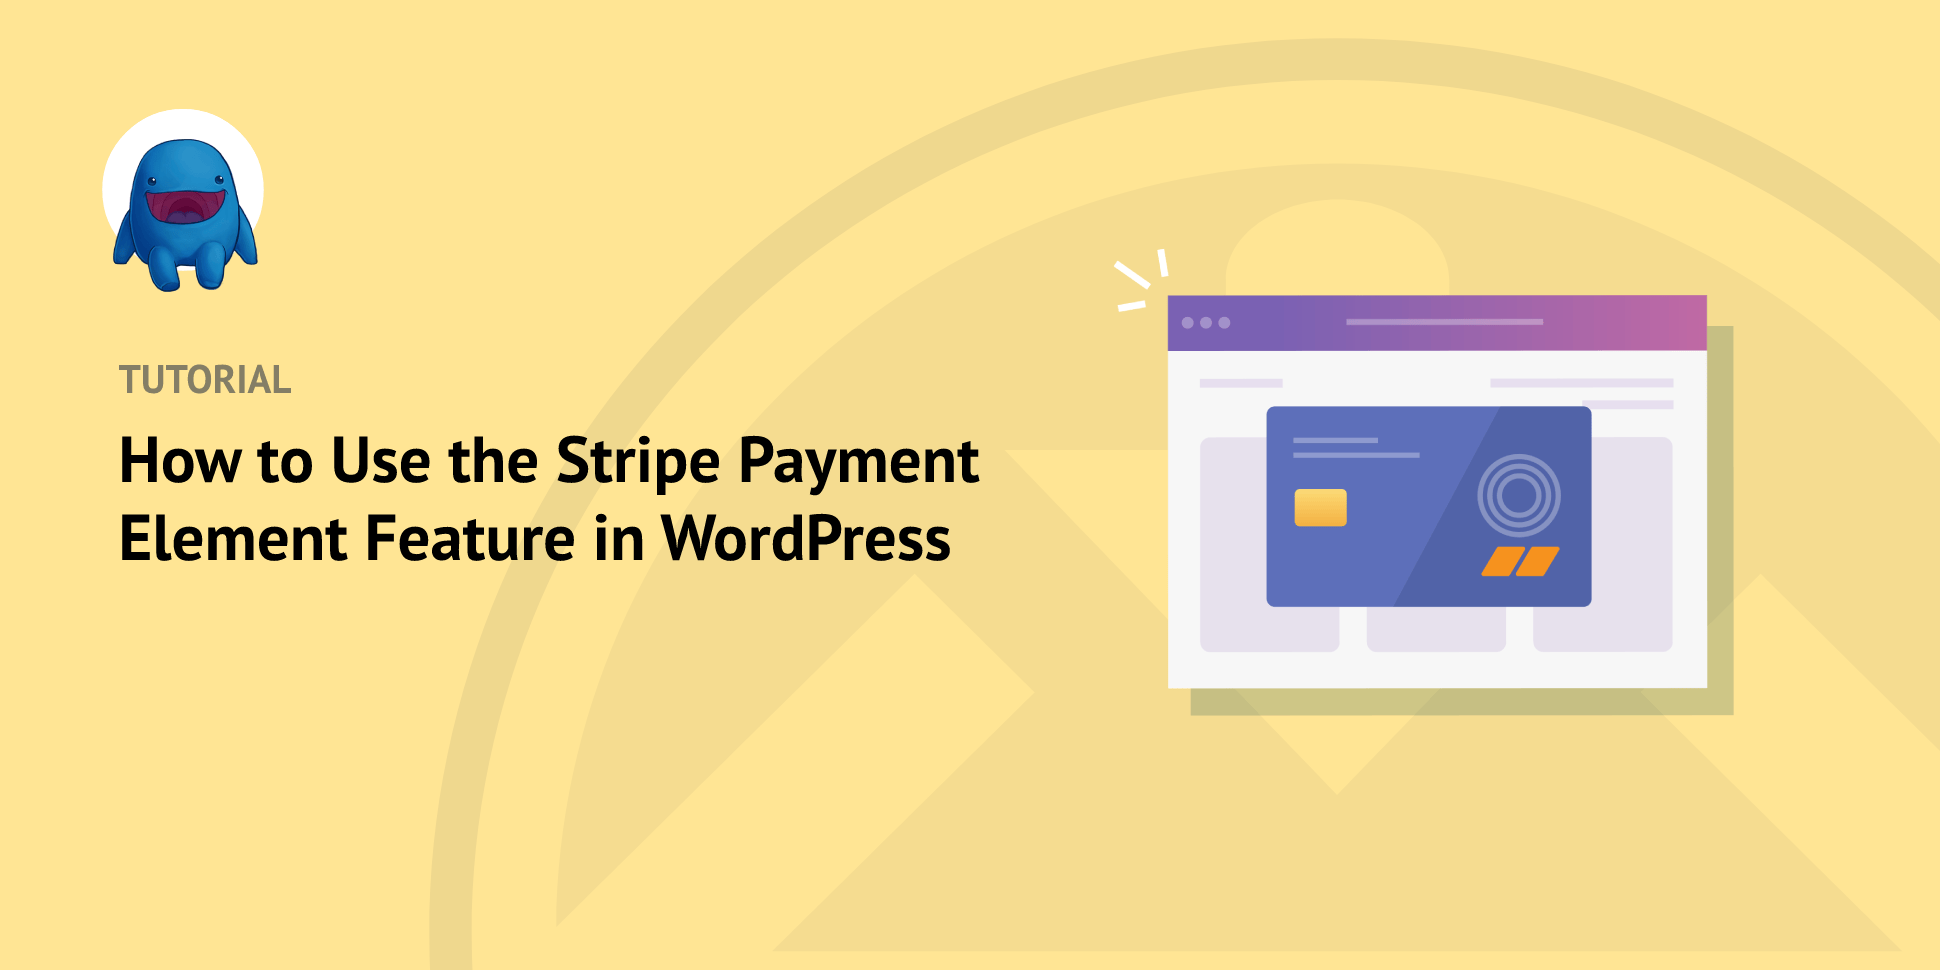 How to Use Stripe Payment Element in WordPress